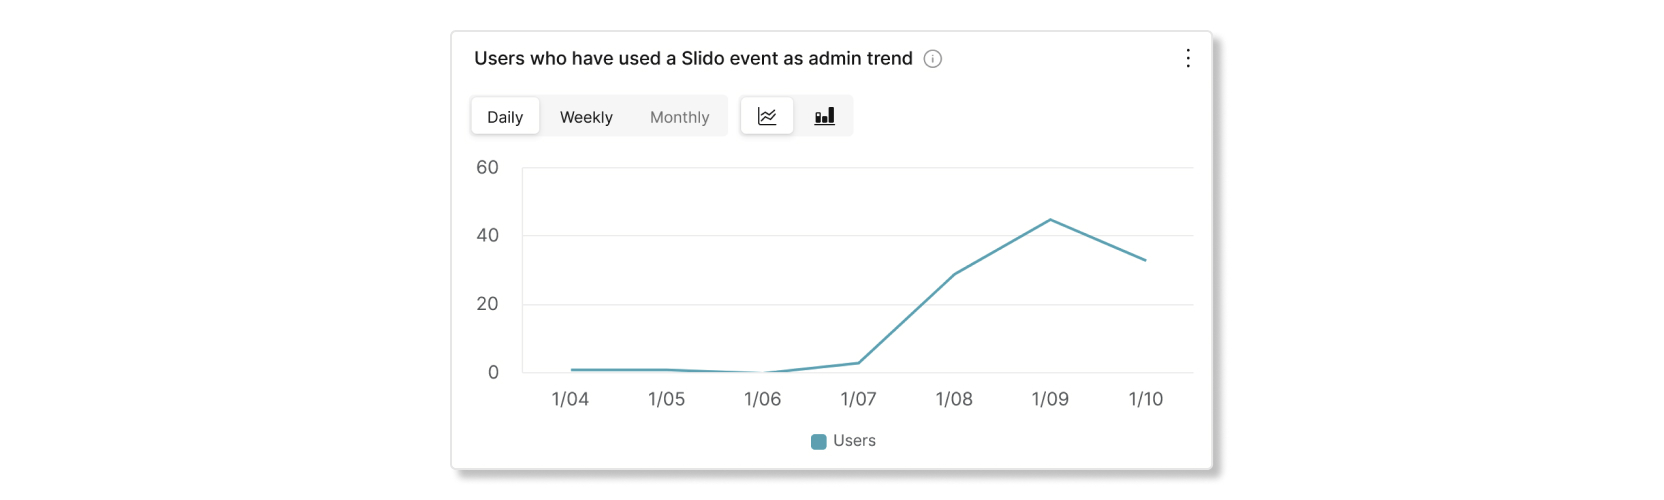 Users who have used a Slido event as admin trend chart in Control Hub Slido analytics